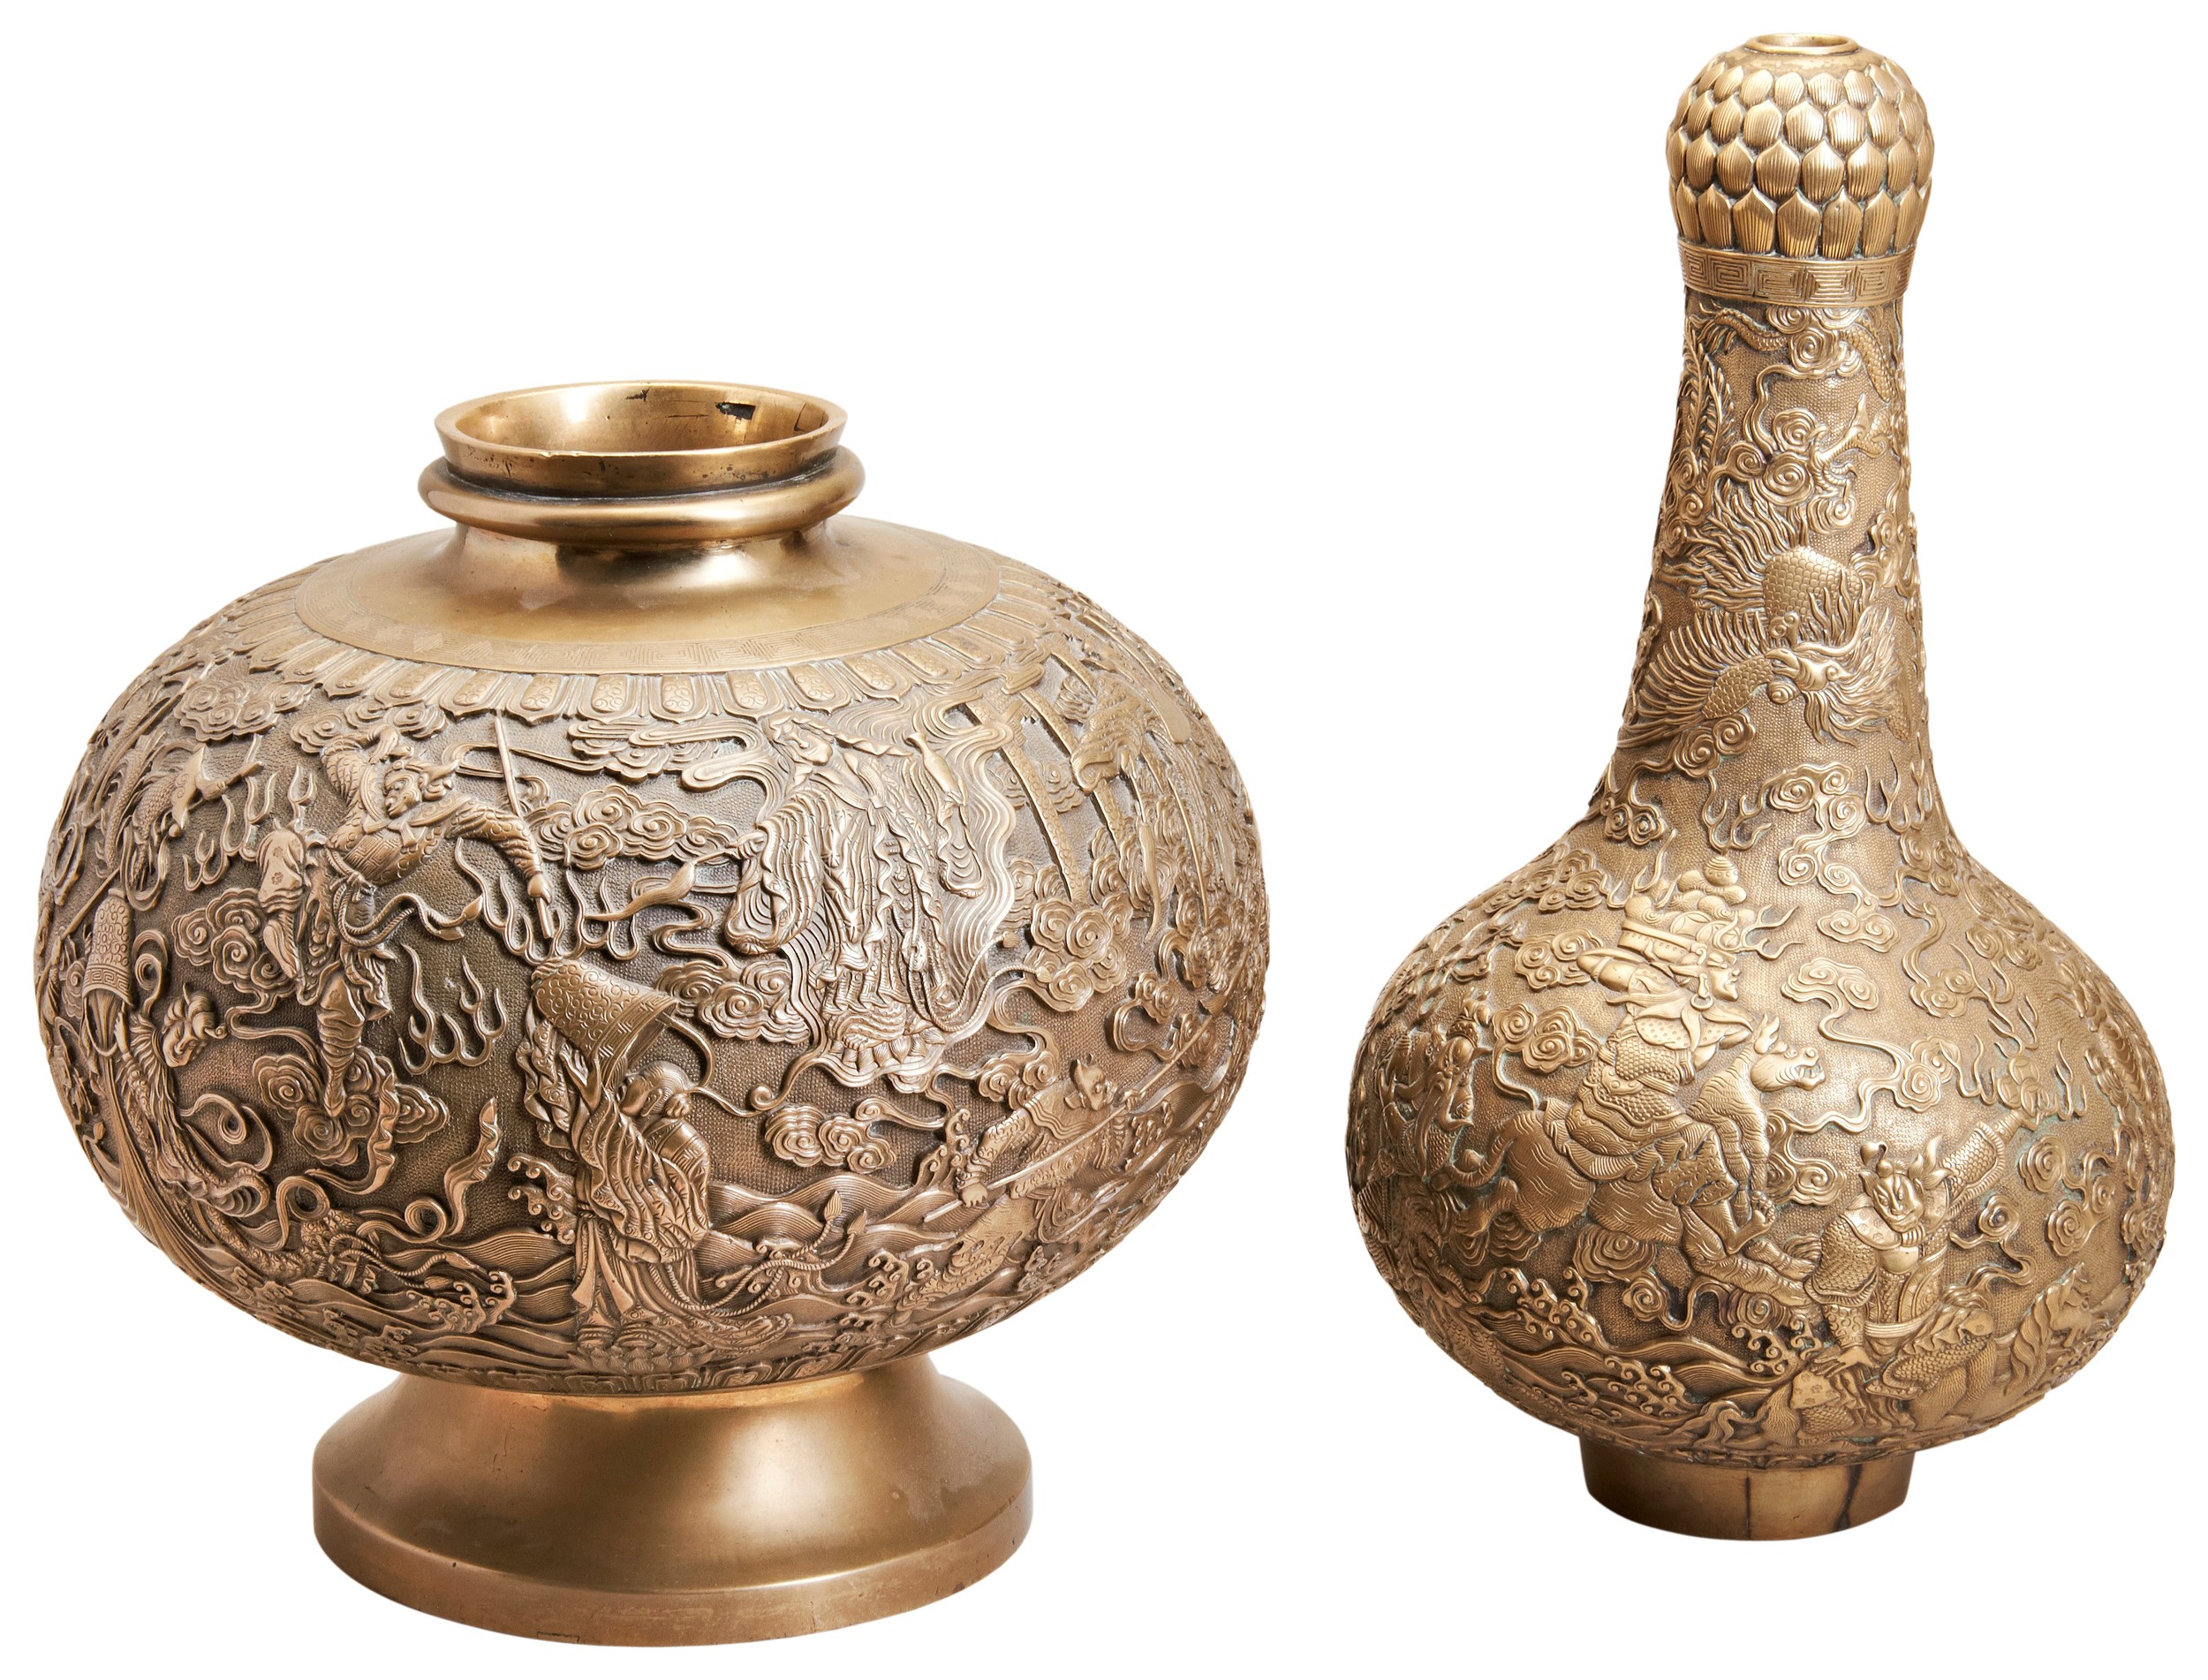 A FINE AND LARGE GILT-BRONZE DOUBLE-GOURD INCENSE BURNER  QING DYNASTY, 18TH / 19TH CENTURY 清 - Image 5 of 5